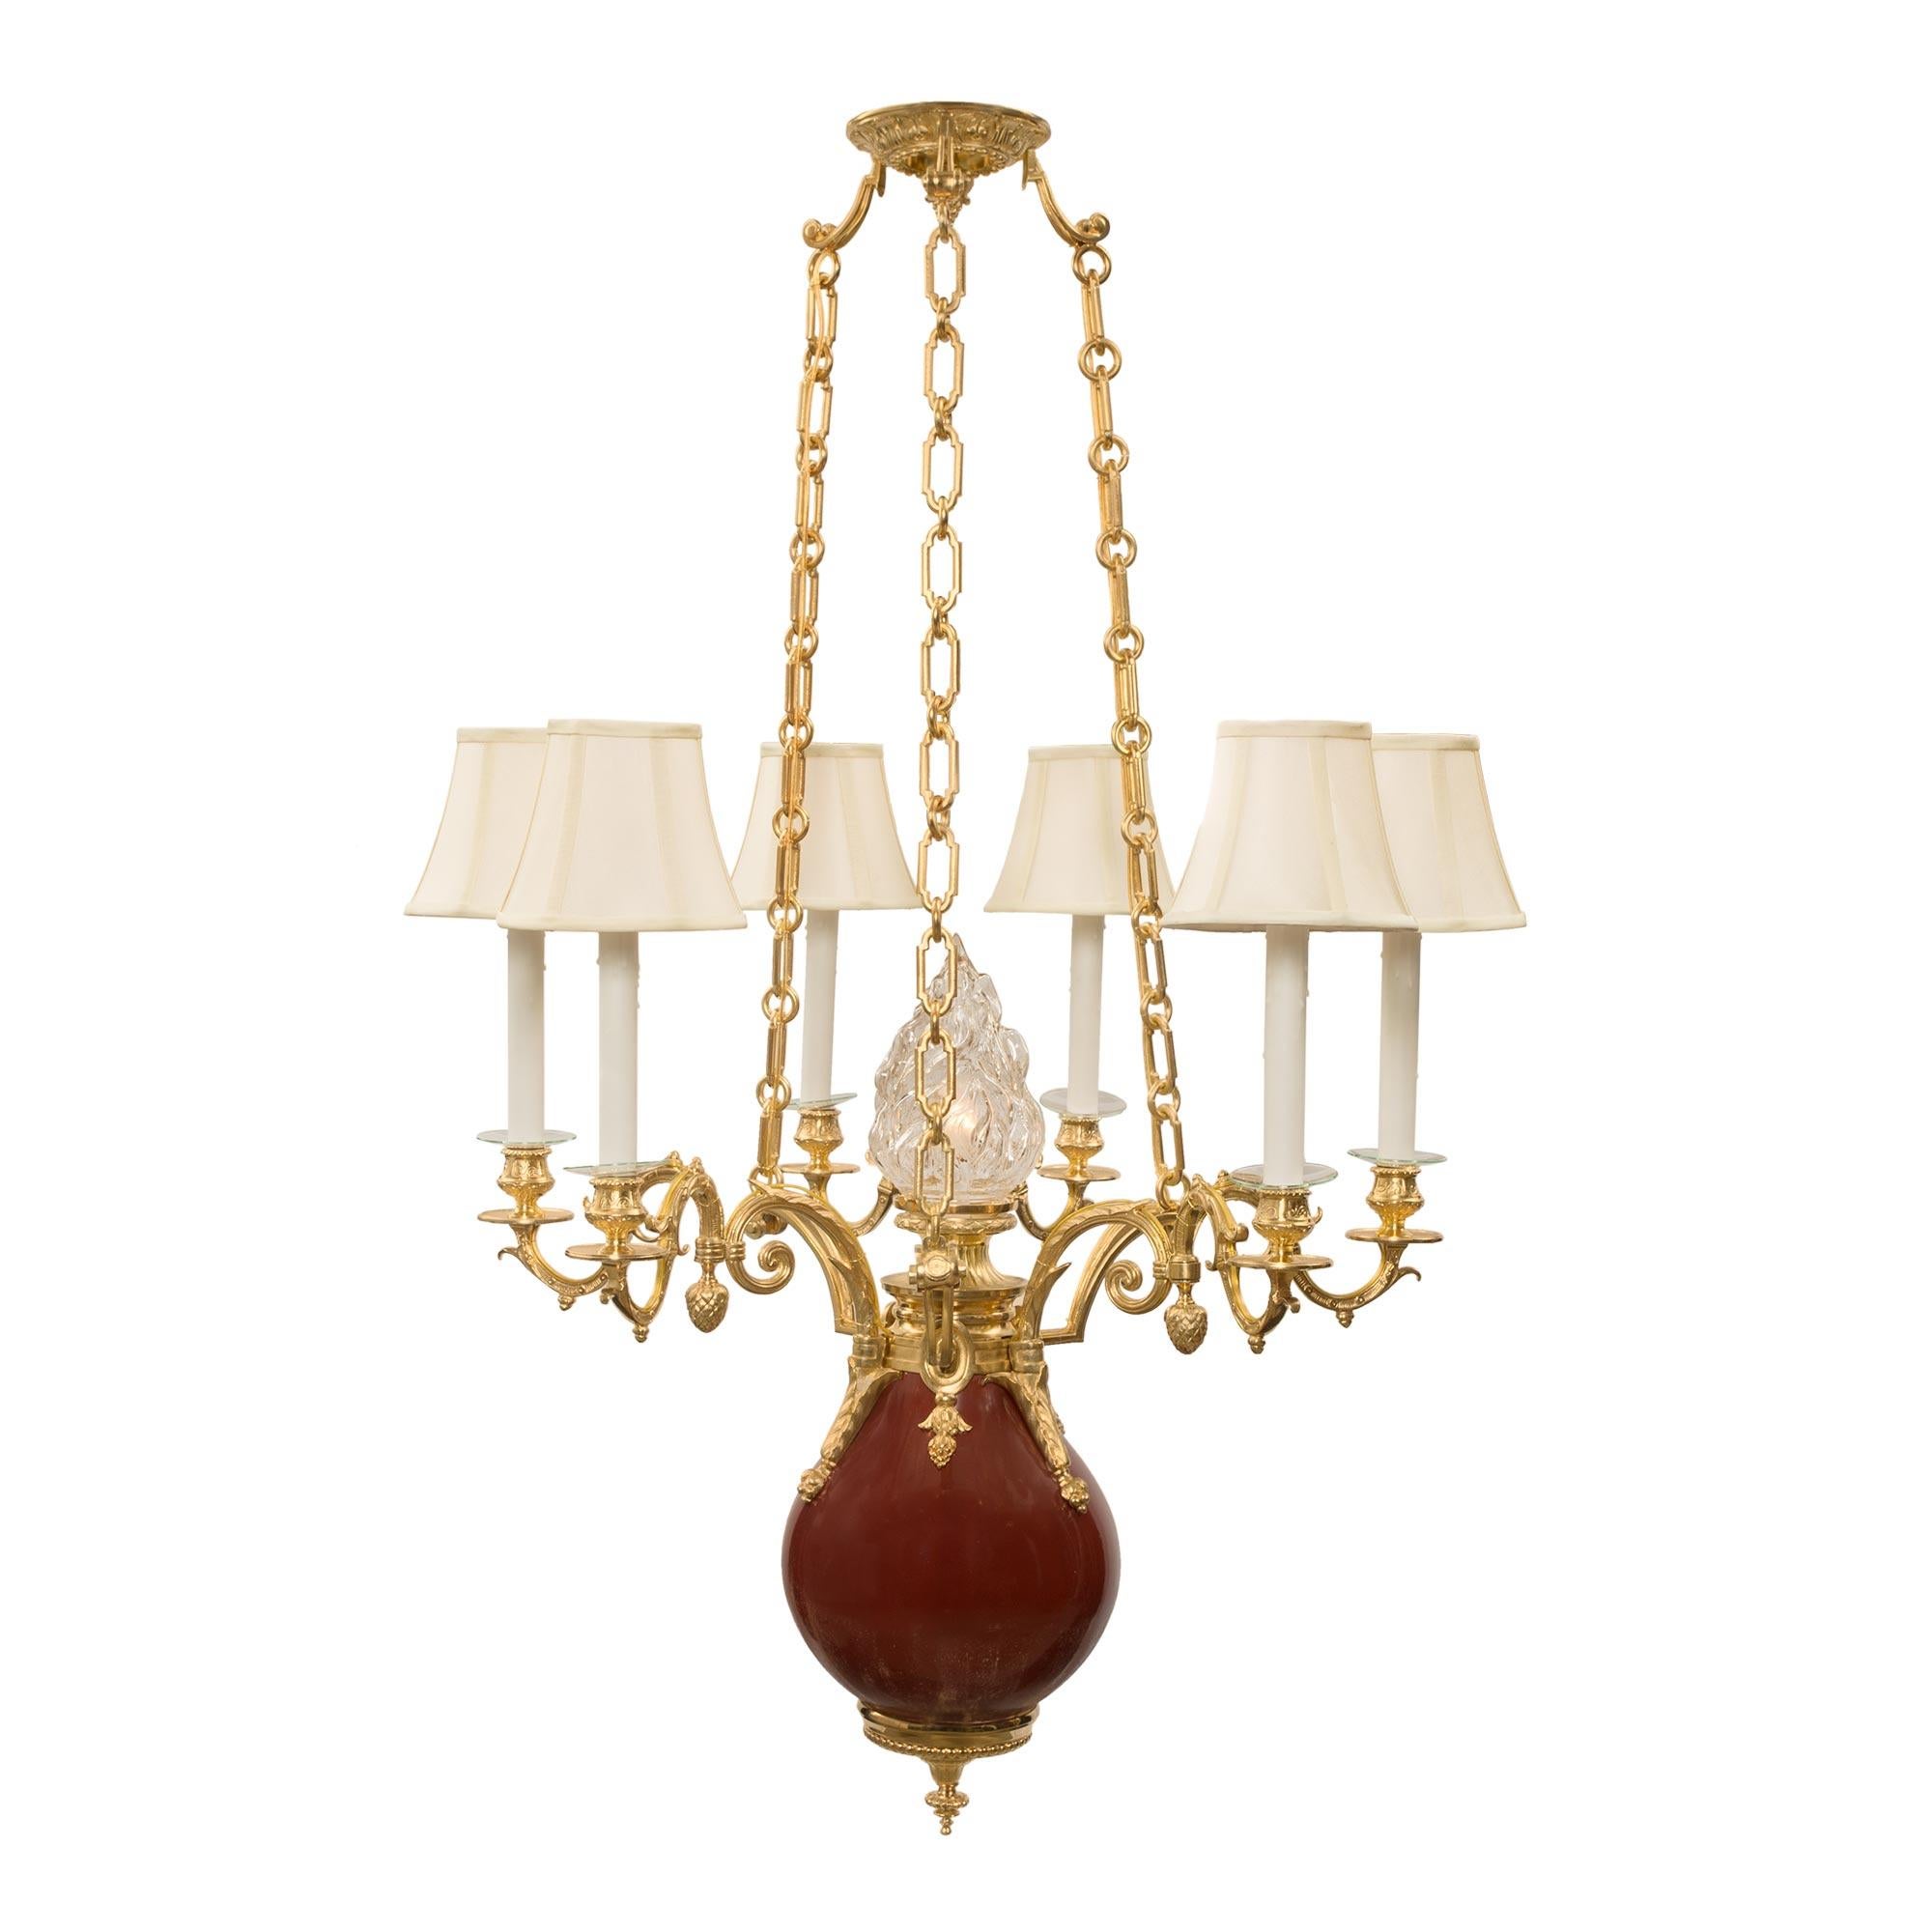 French 19th Century Louis XVI Style Porcelain and Ormolu Chandelier